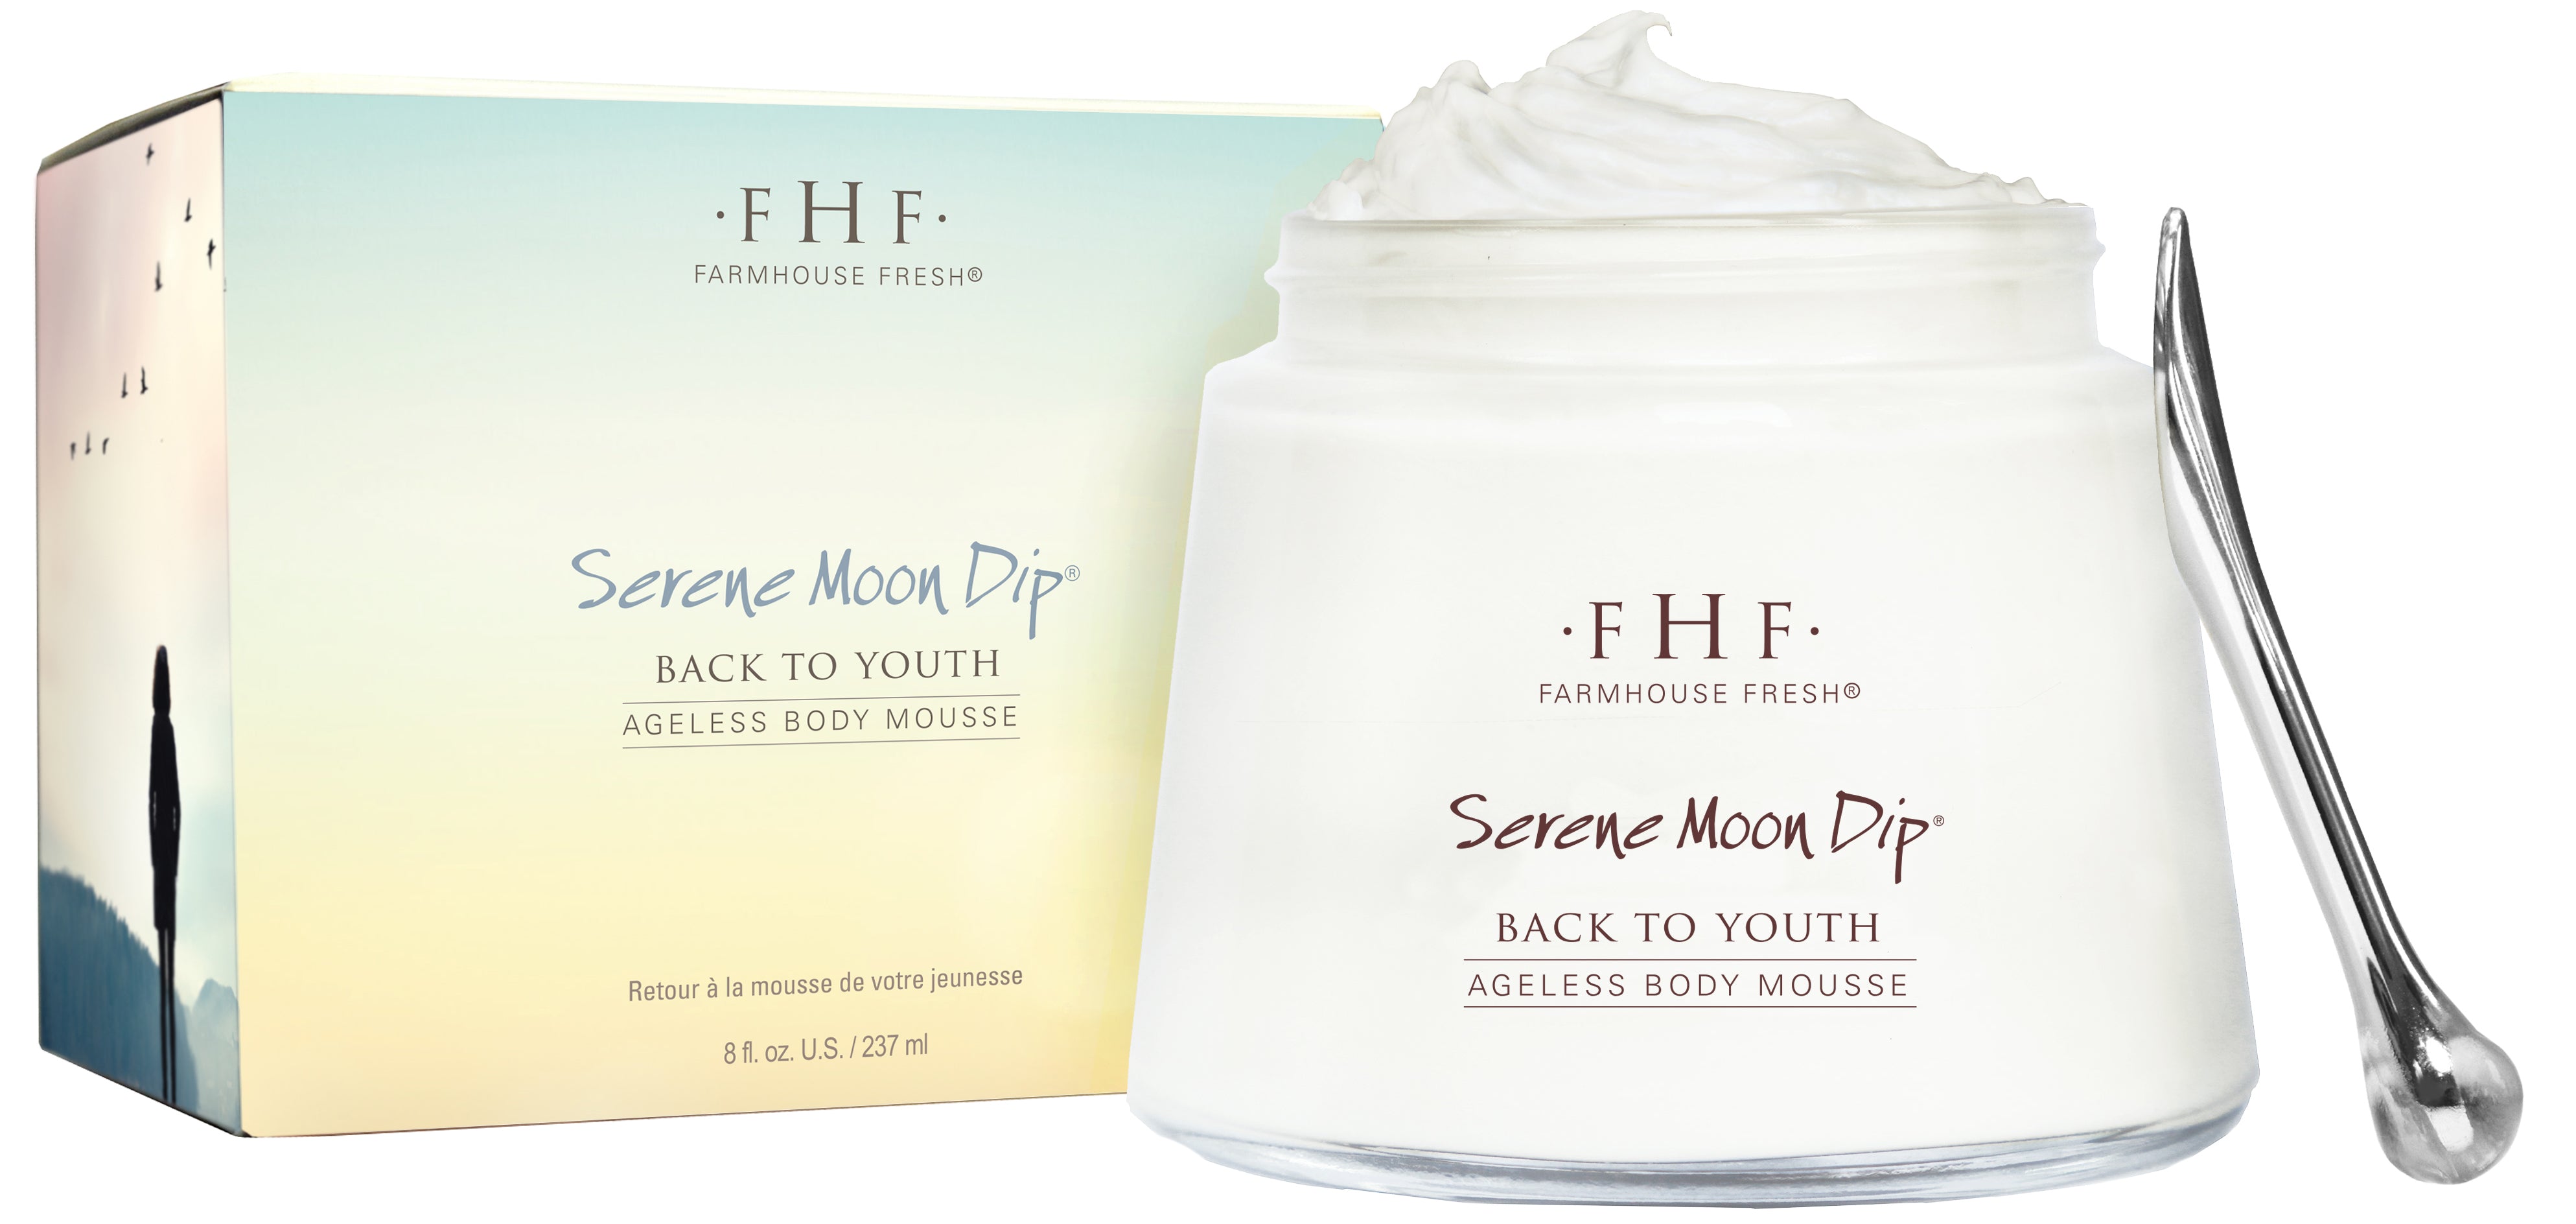 Farmhouse Fresh Serene Moon Dip® Back To Youth Ageless Body Mousse